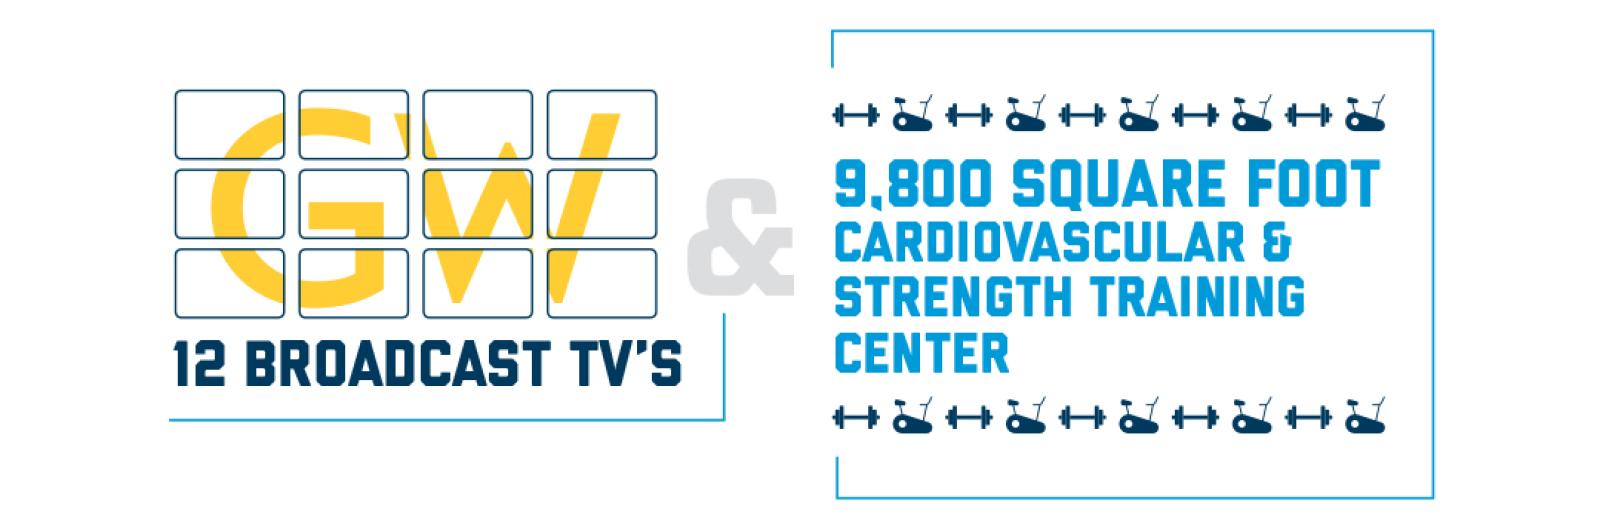 12 broadcast TVs | 9,800 sq foot cardiovascular and strength training center/weight room